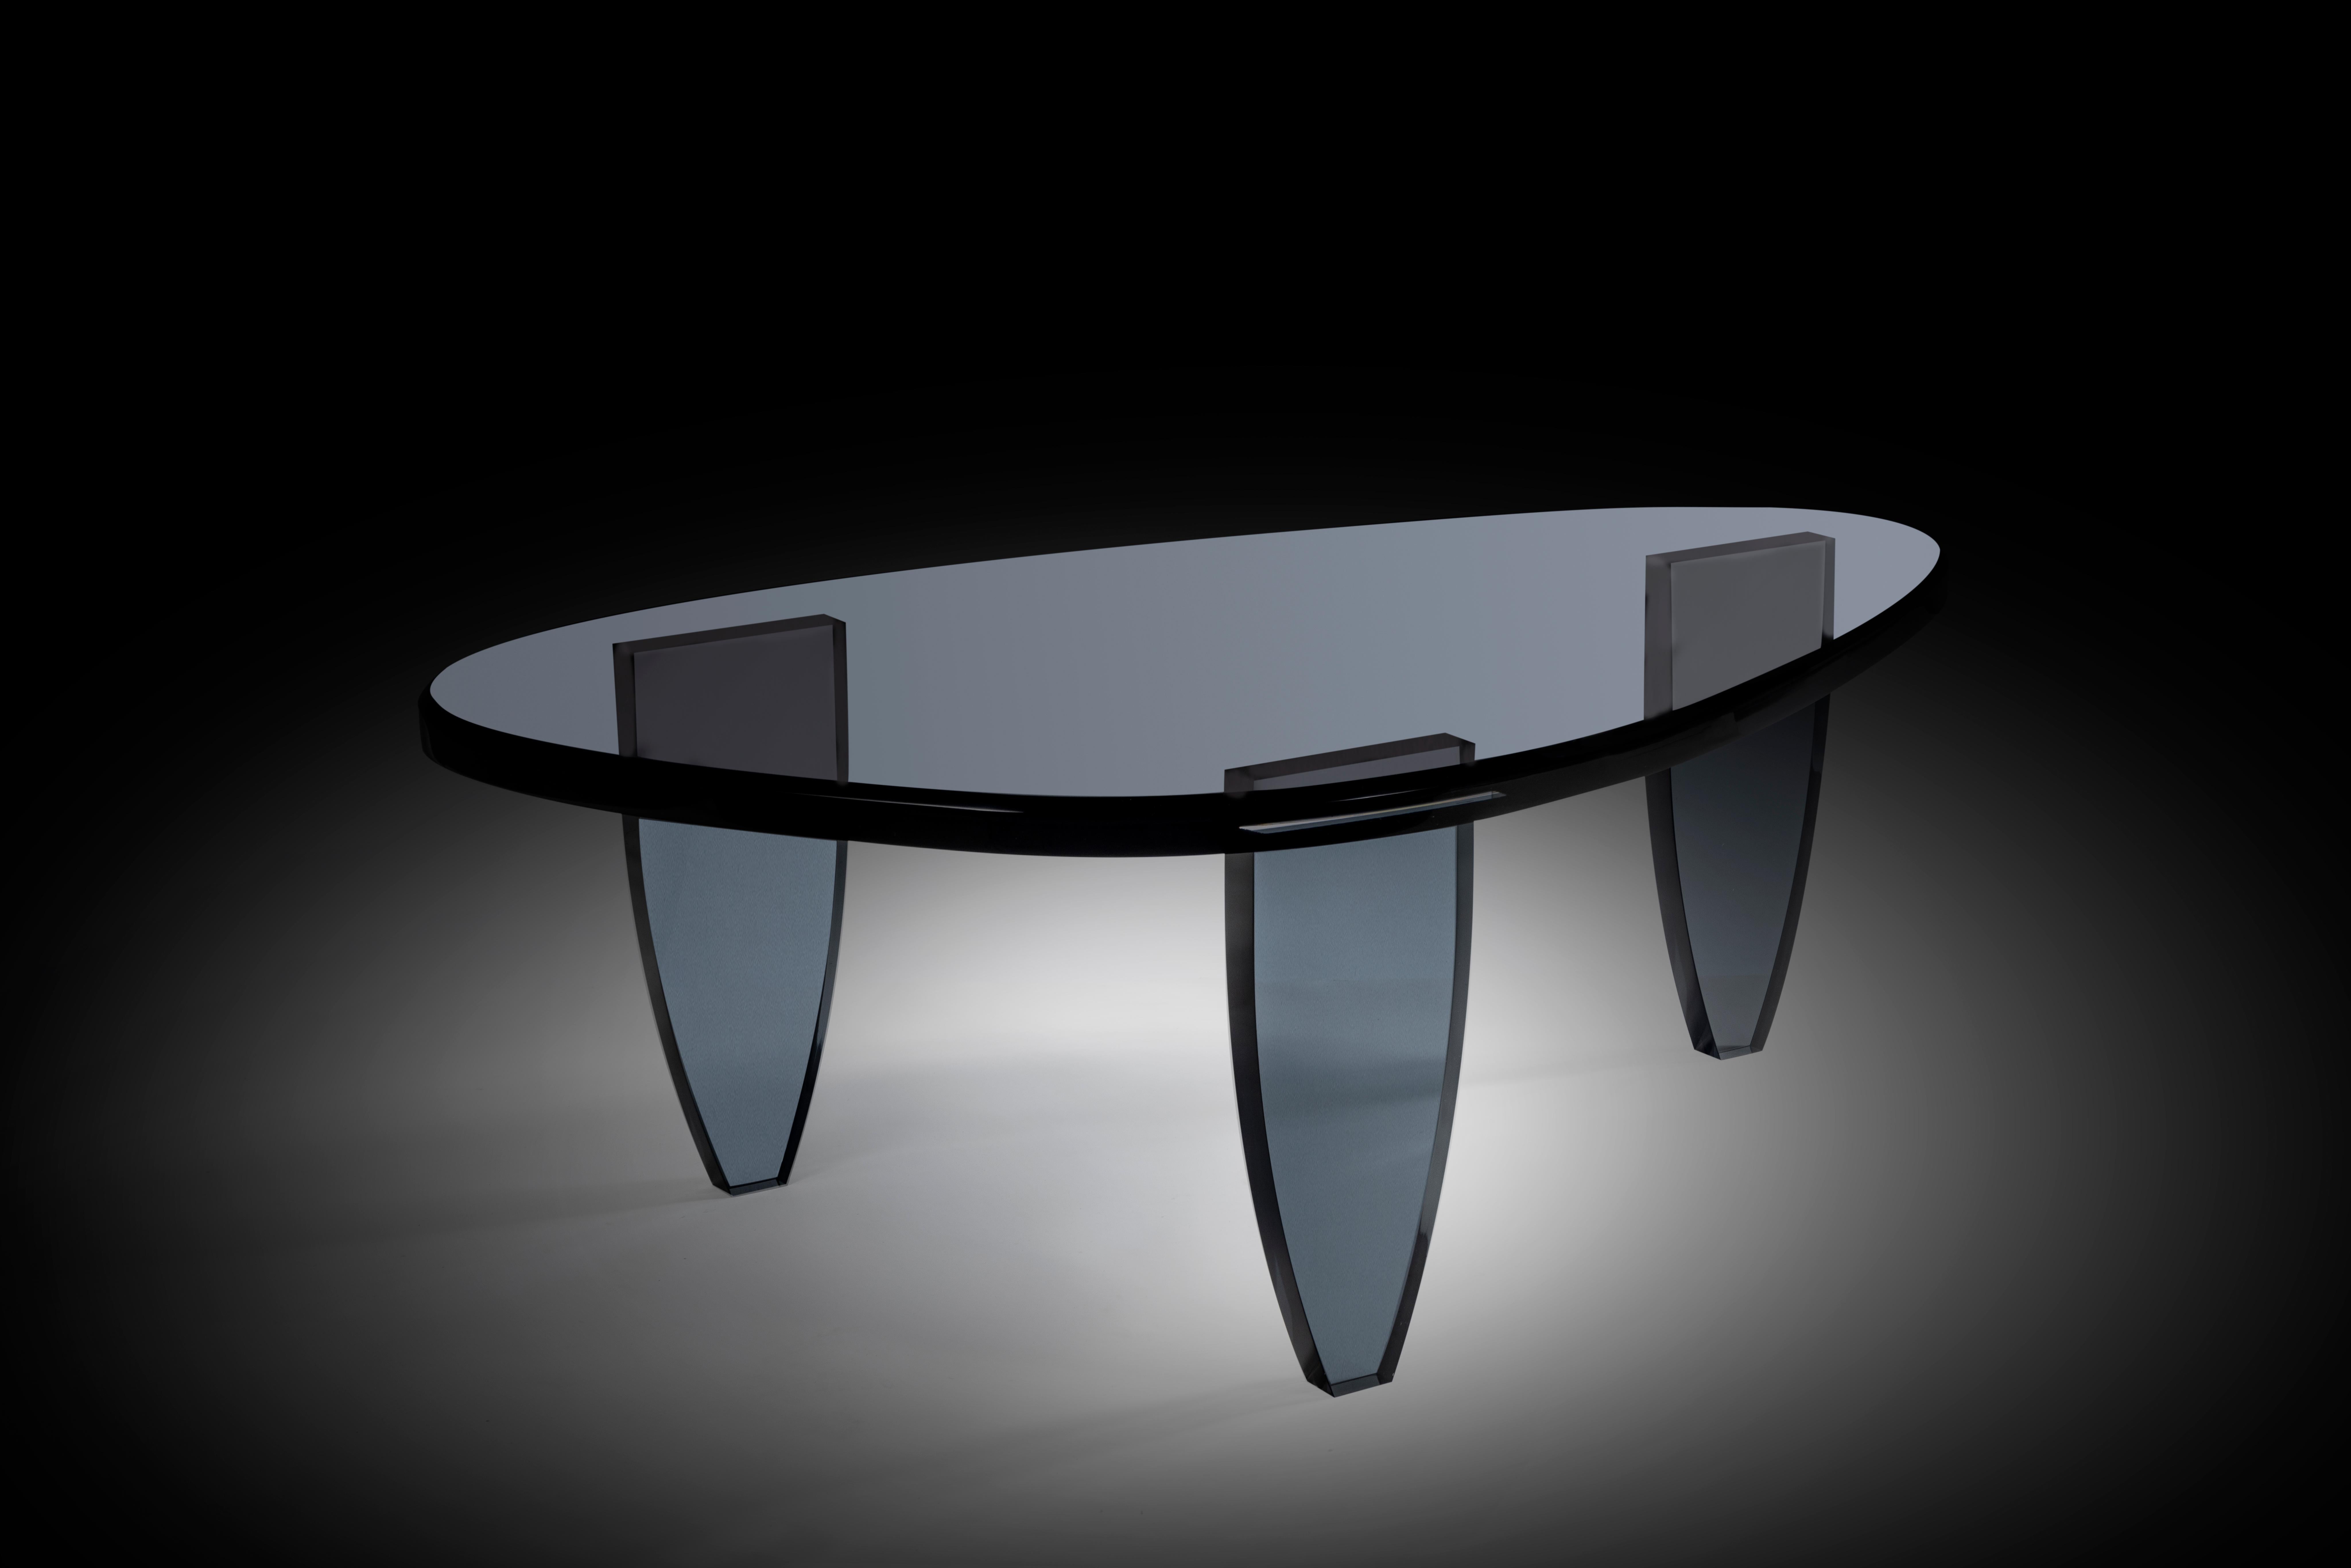 Candy Grey Coffee Table by Charly Bounan
One of a Kind
Dimensions: D 73 x W 119 x H 40 cm. 
Materials: Acrylic glass.

Also available in different colors. Please contact us.

Charly Bounan, is a Parisian designer renowned for its refined creative